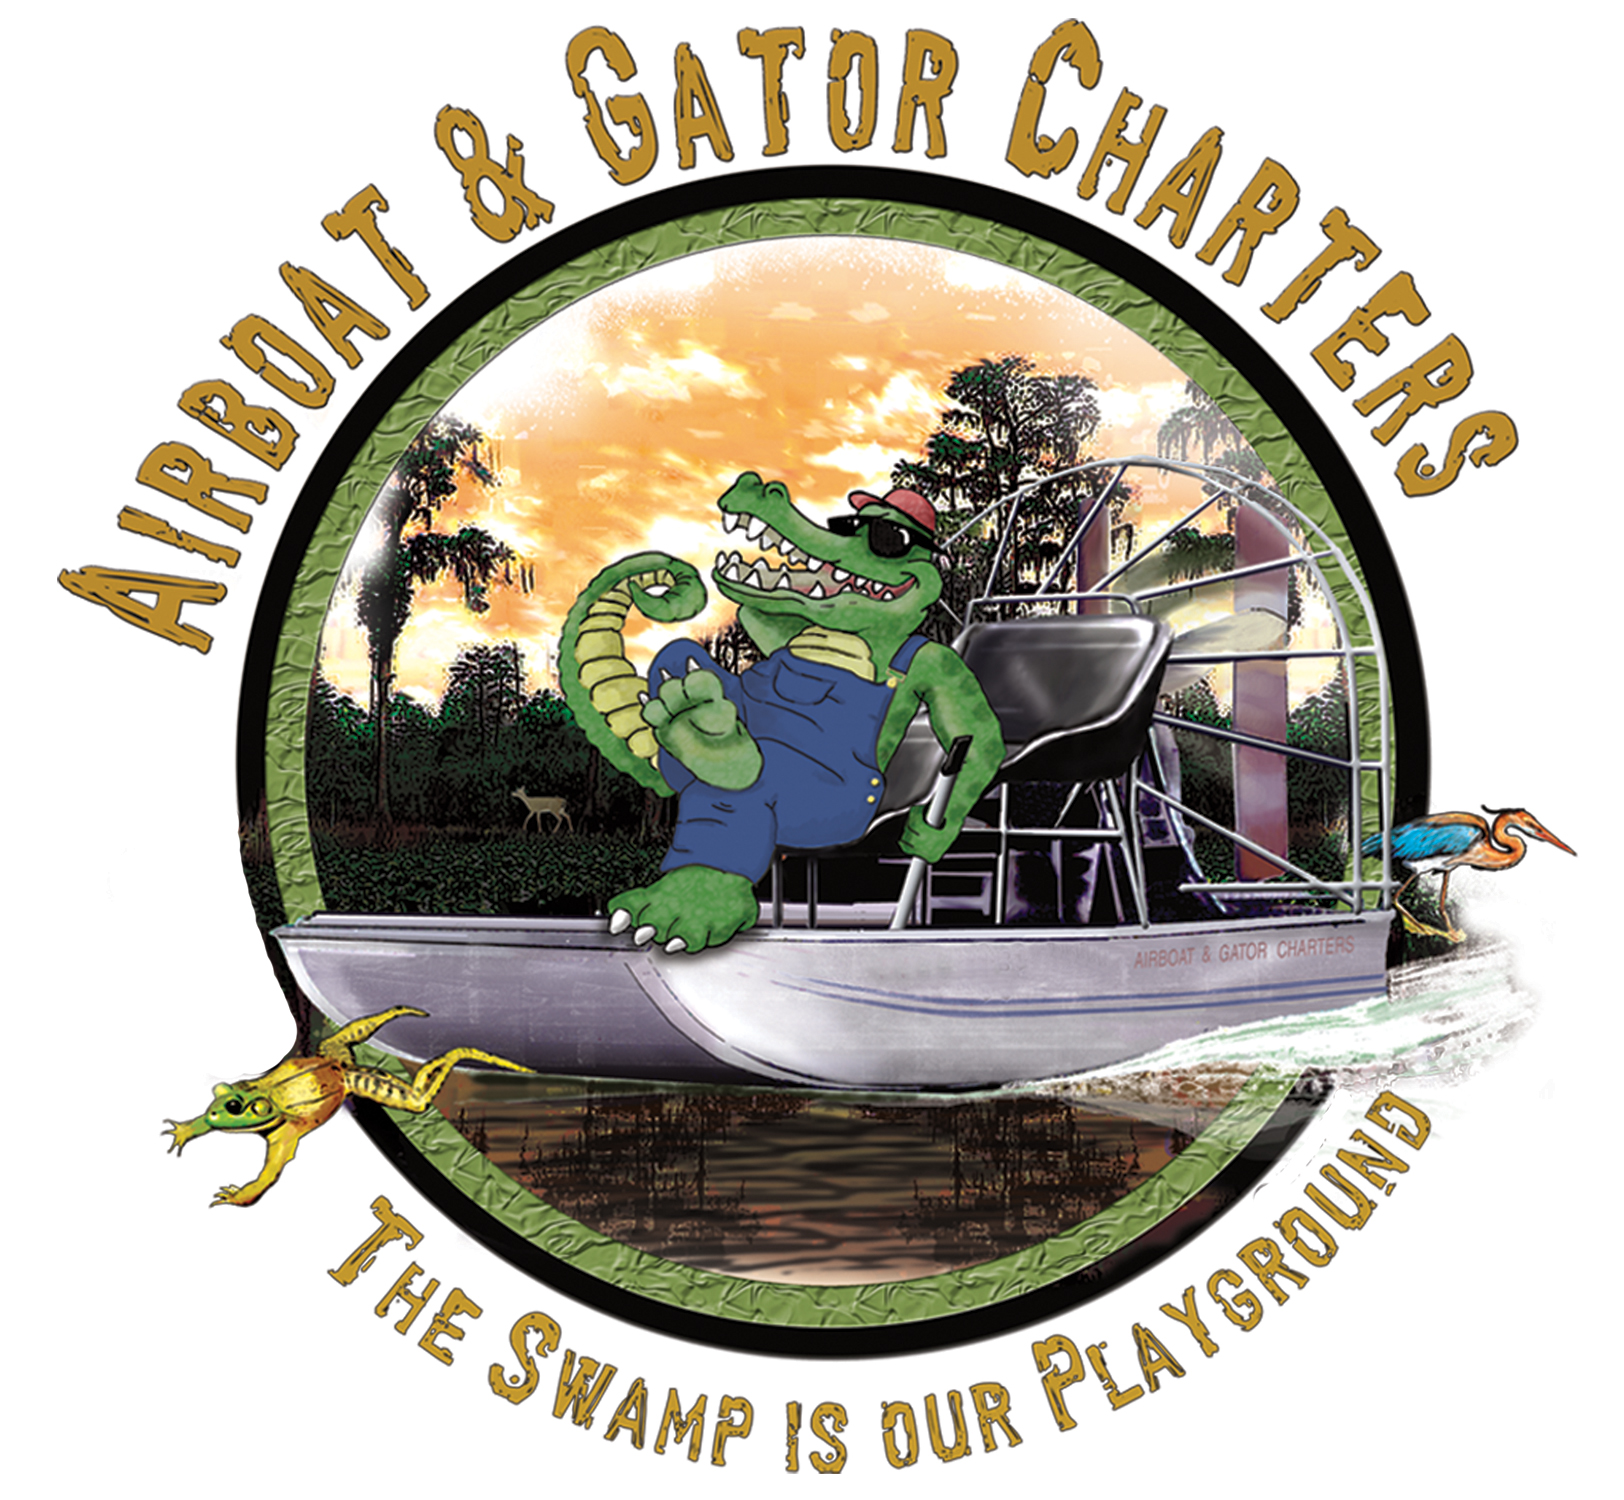 Airboat & Gator Charter, Inc.